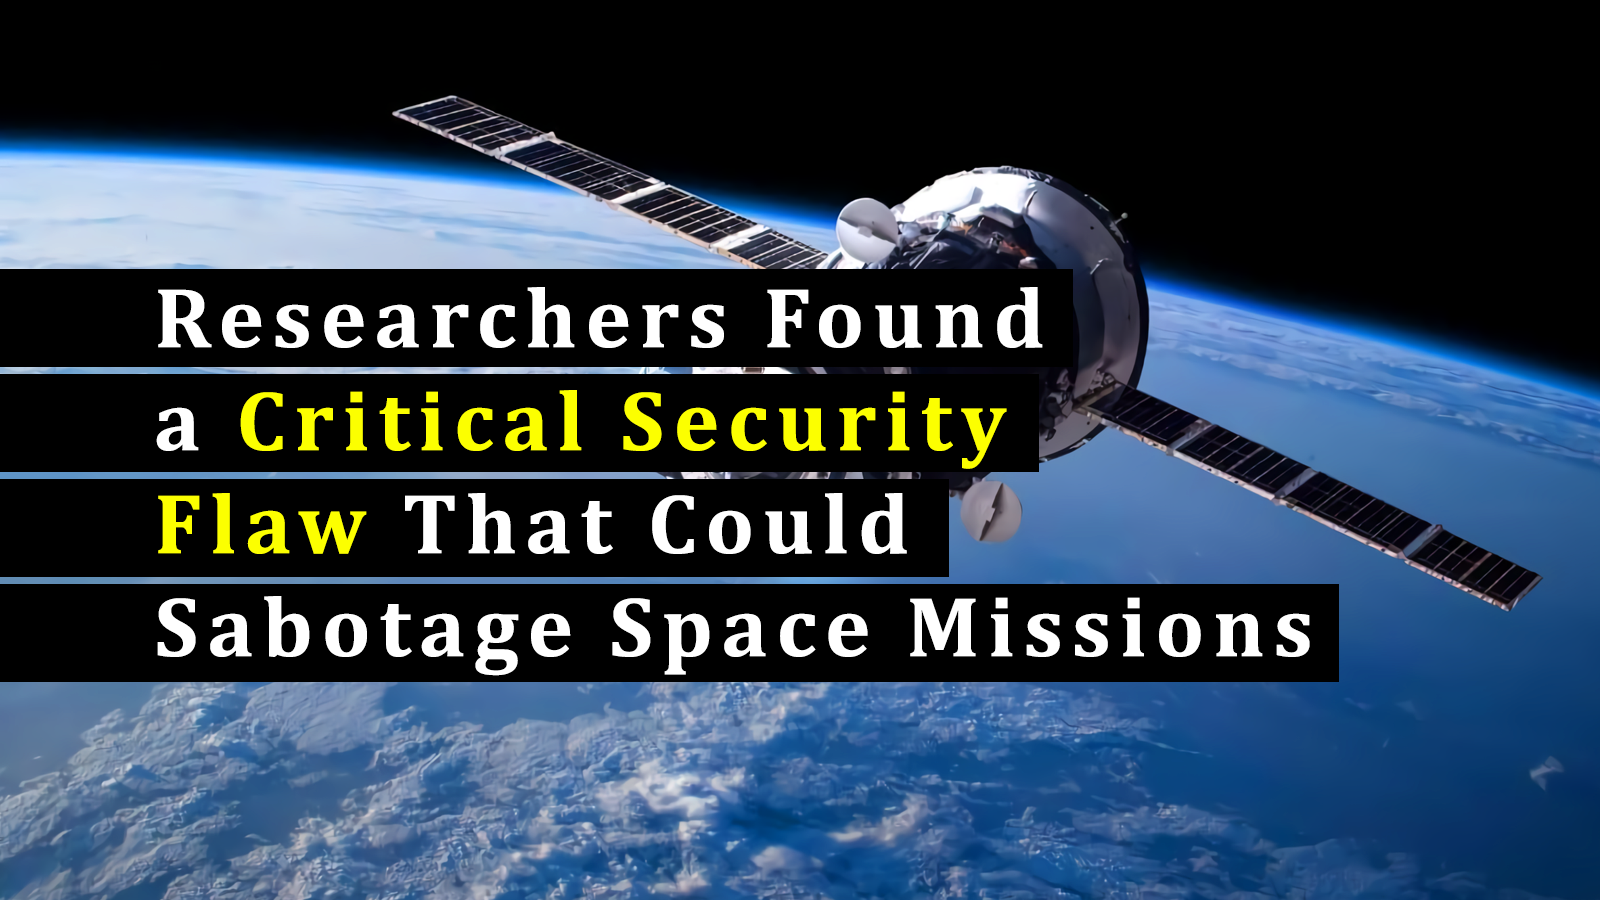 Researchers Found a Critical Security Flaw That Could Sabotage Space Missions